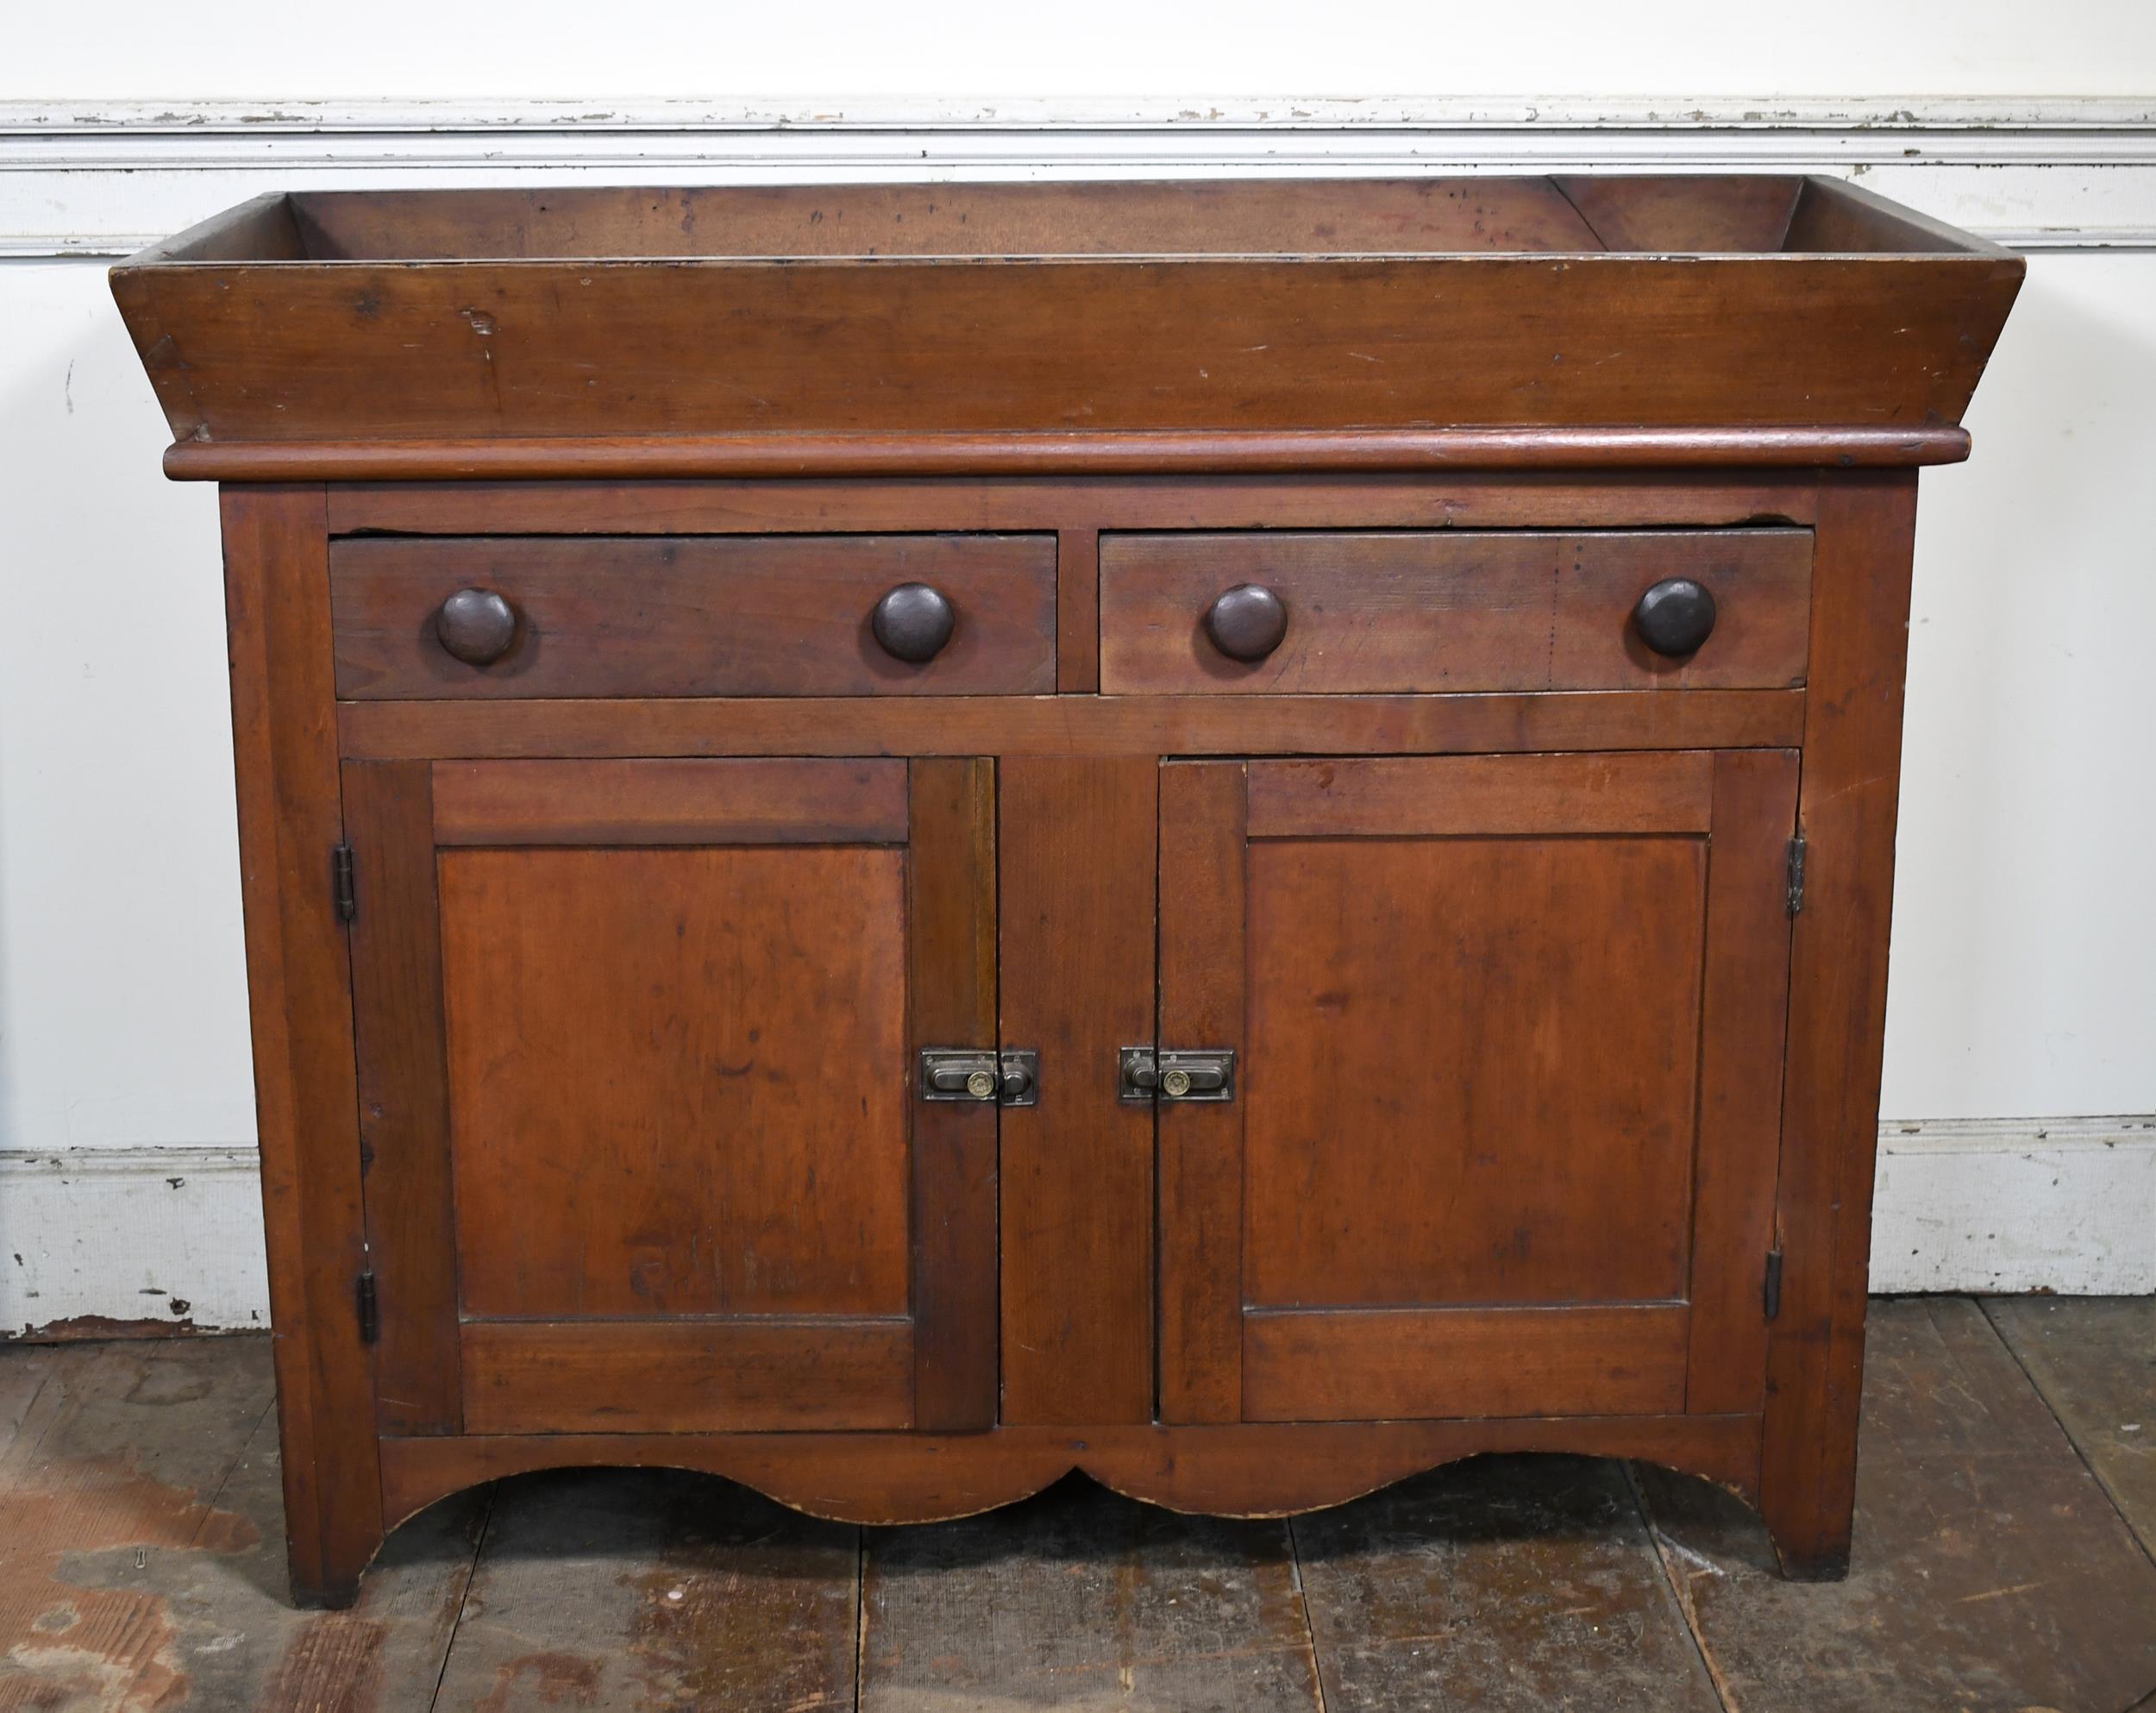 EARLY 19TH C CHERRY DRY SINK  307419